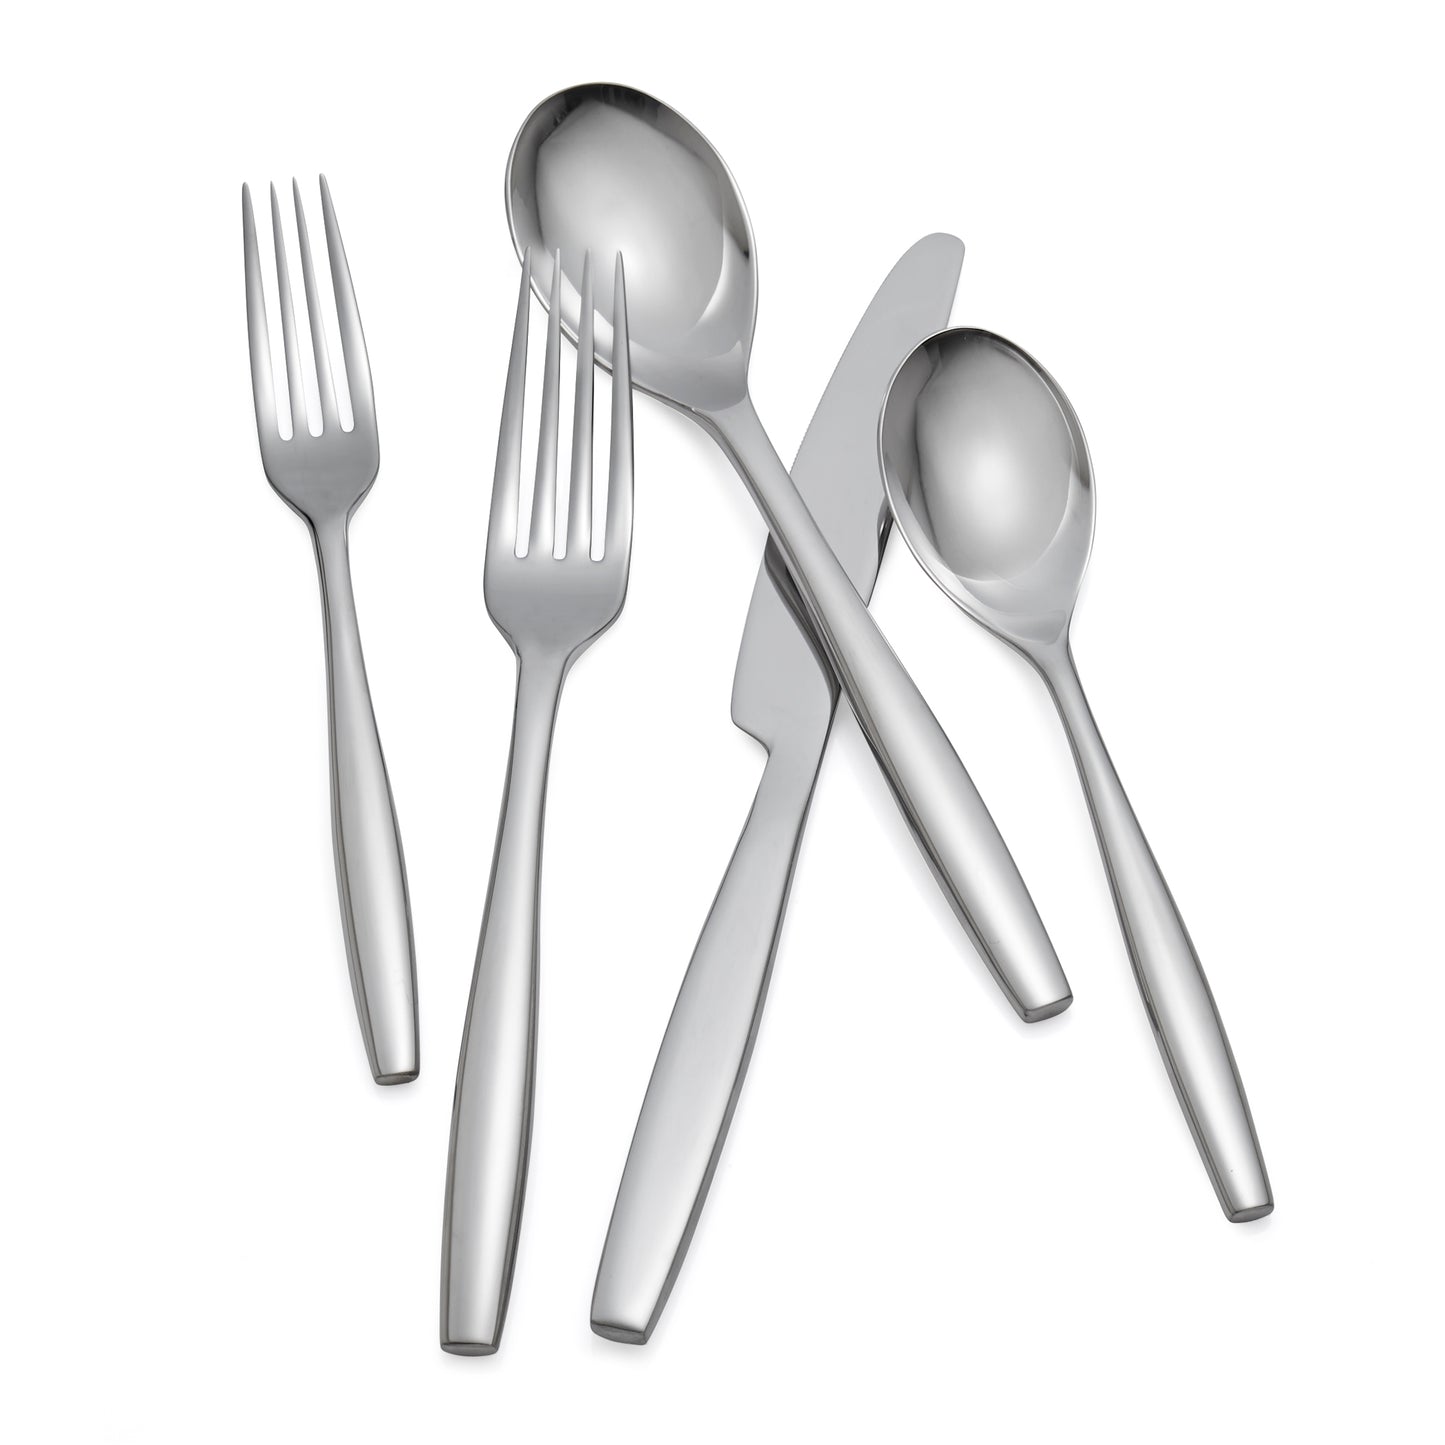 Aidan 5-Piece Place Setting Service for 4